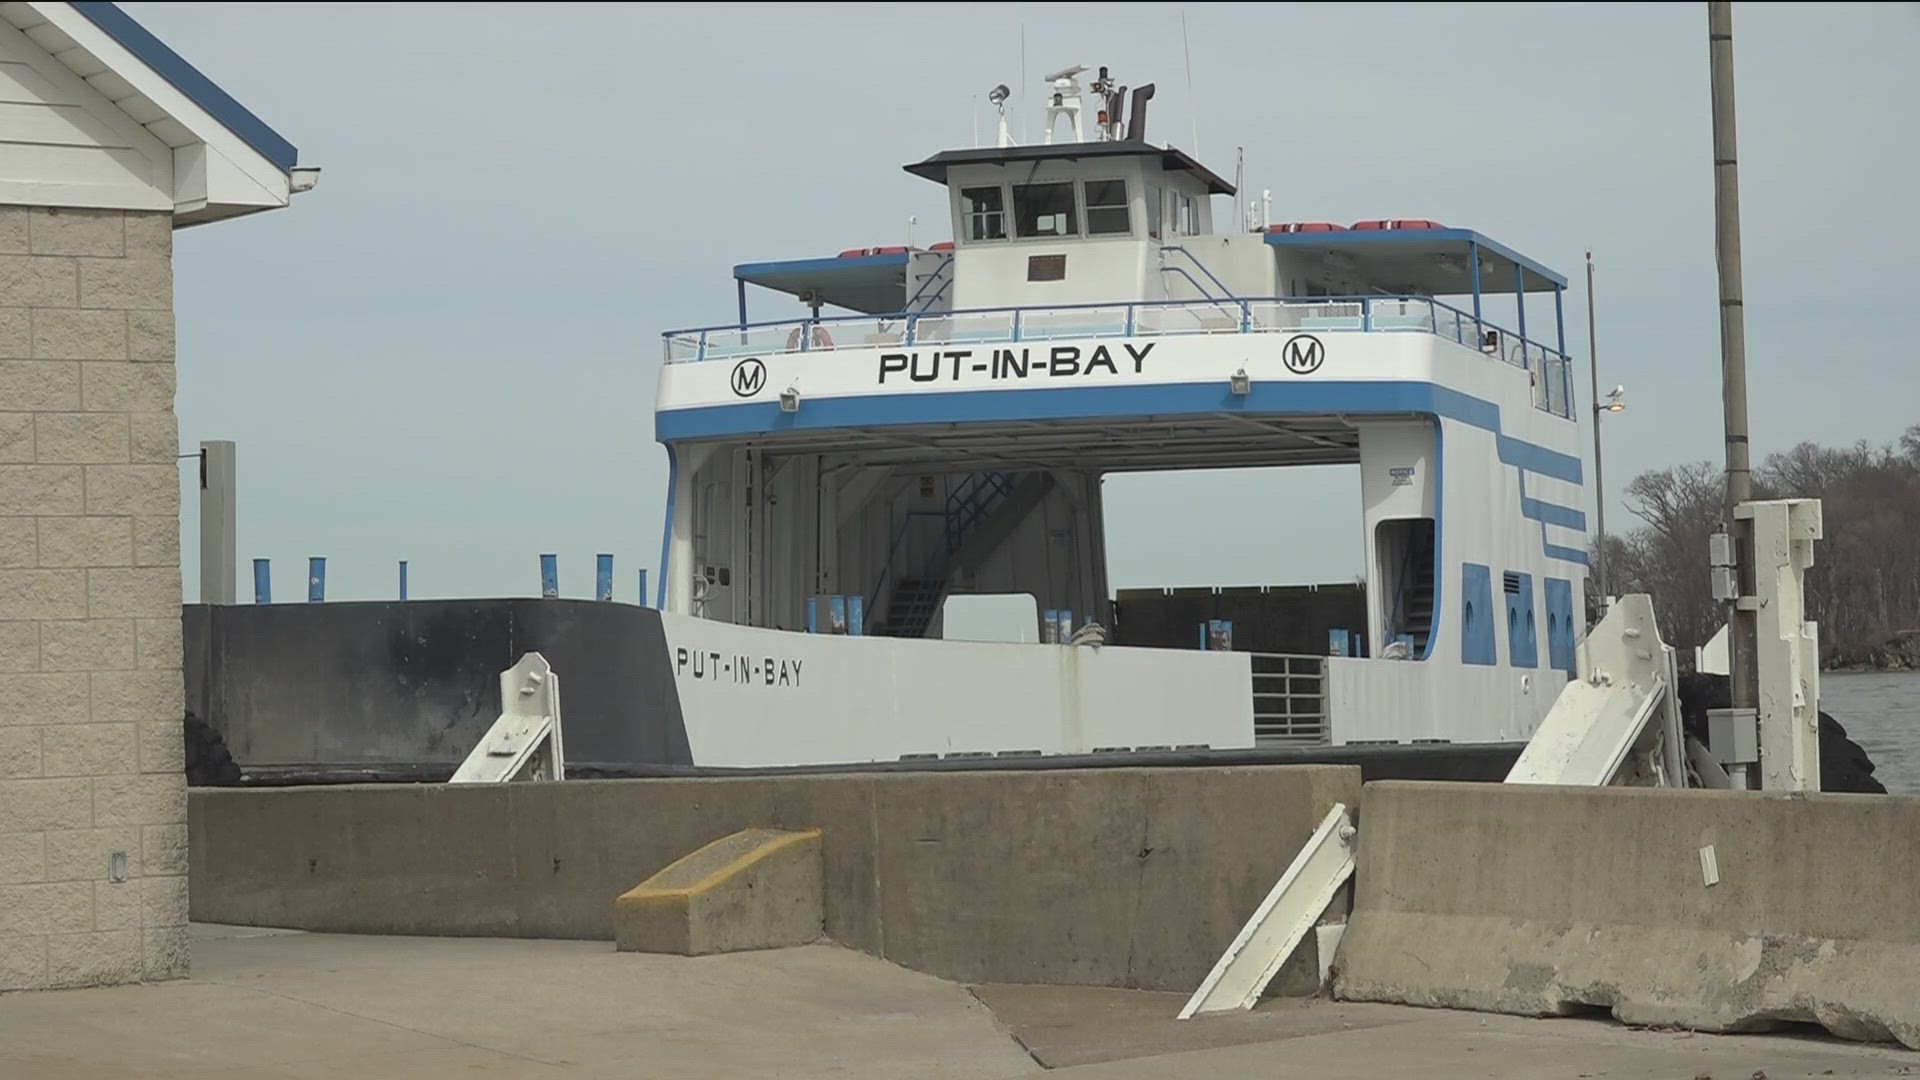 For the second straight year, Miller Ferry is launching its season early due to warmer-than-usual temperatures and a lack of Lake Erie ice cover.